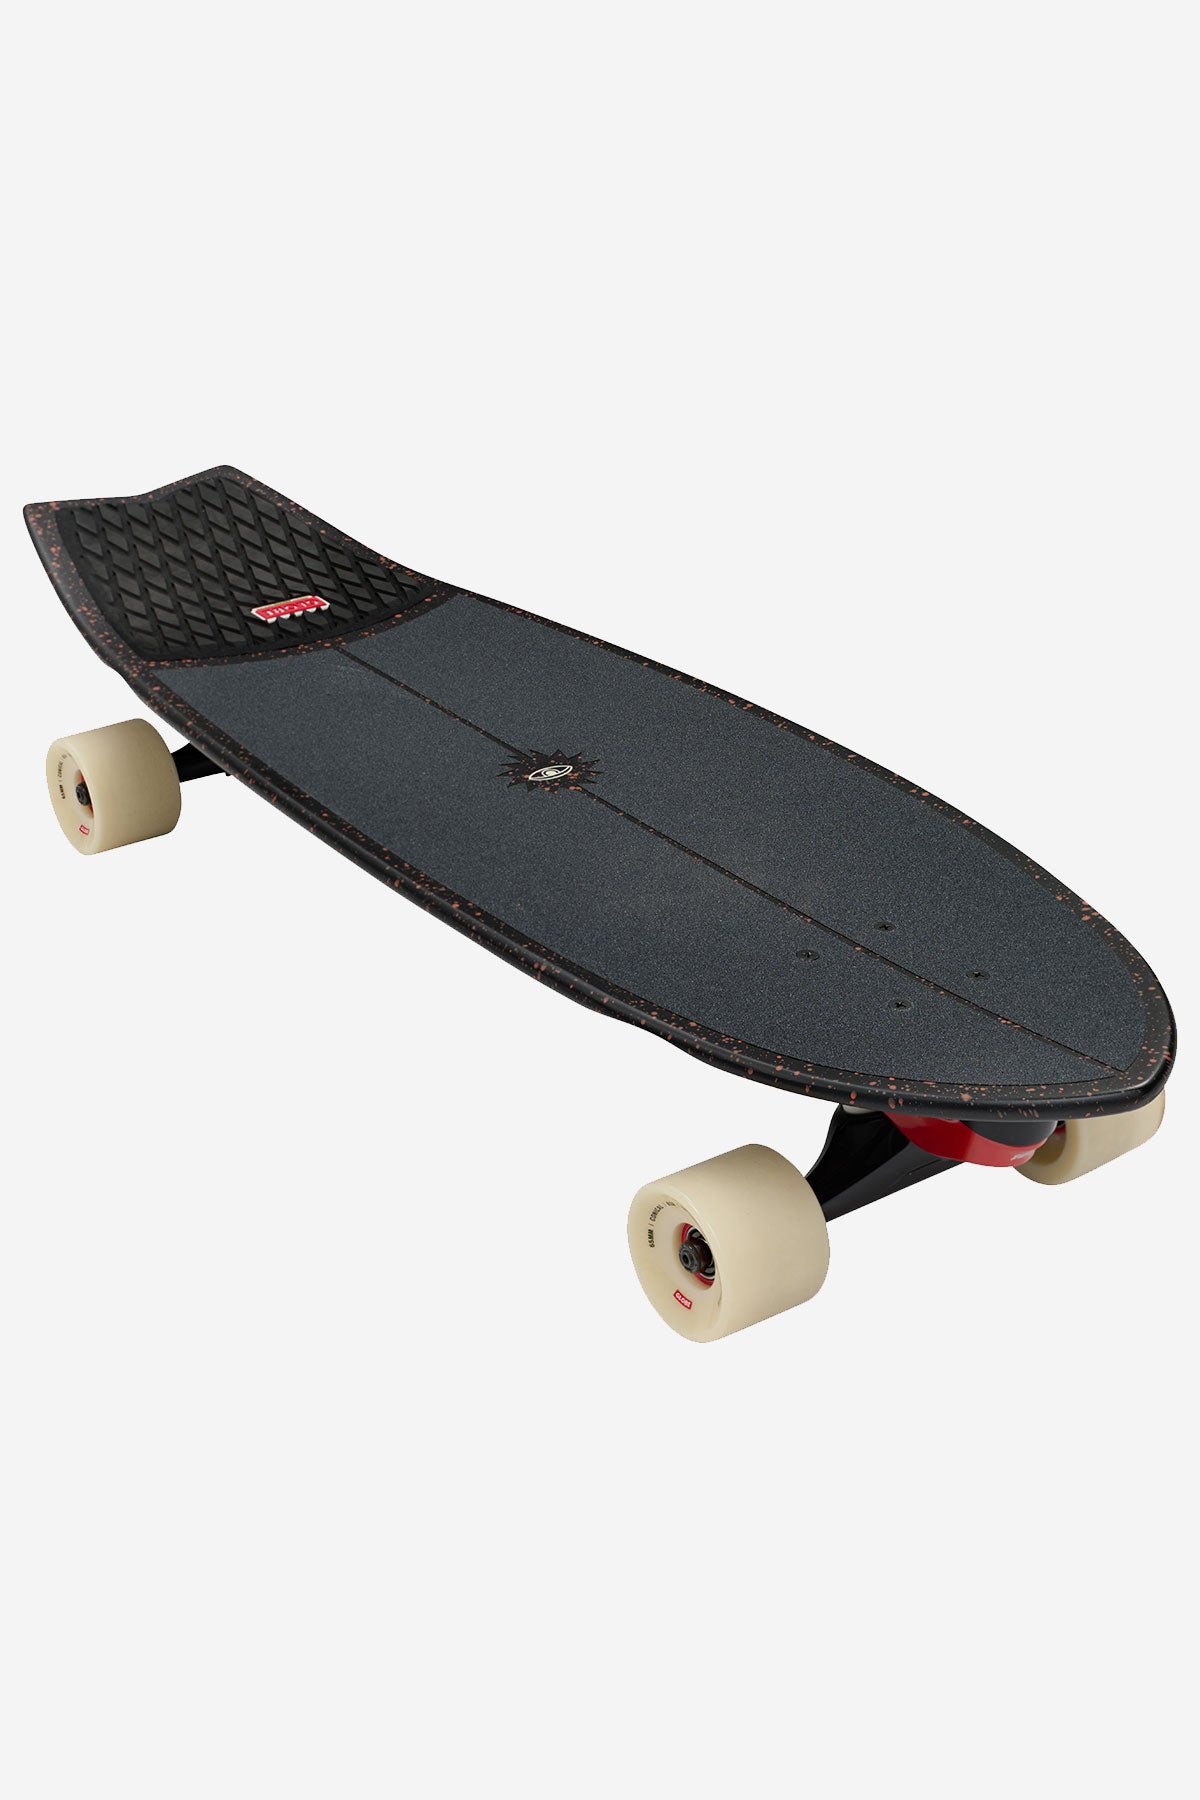 top angled view of Sun City 31" Surf/Skate Cruiser